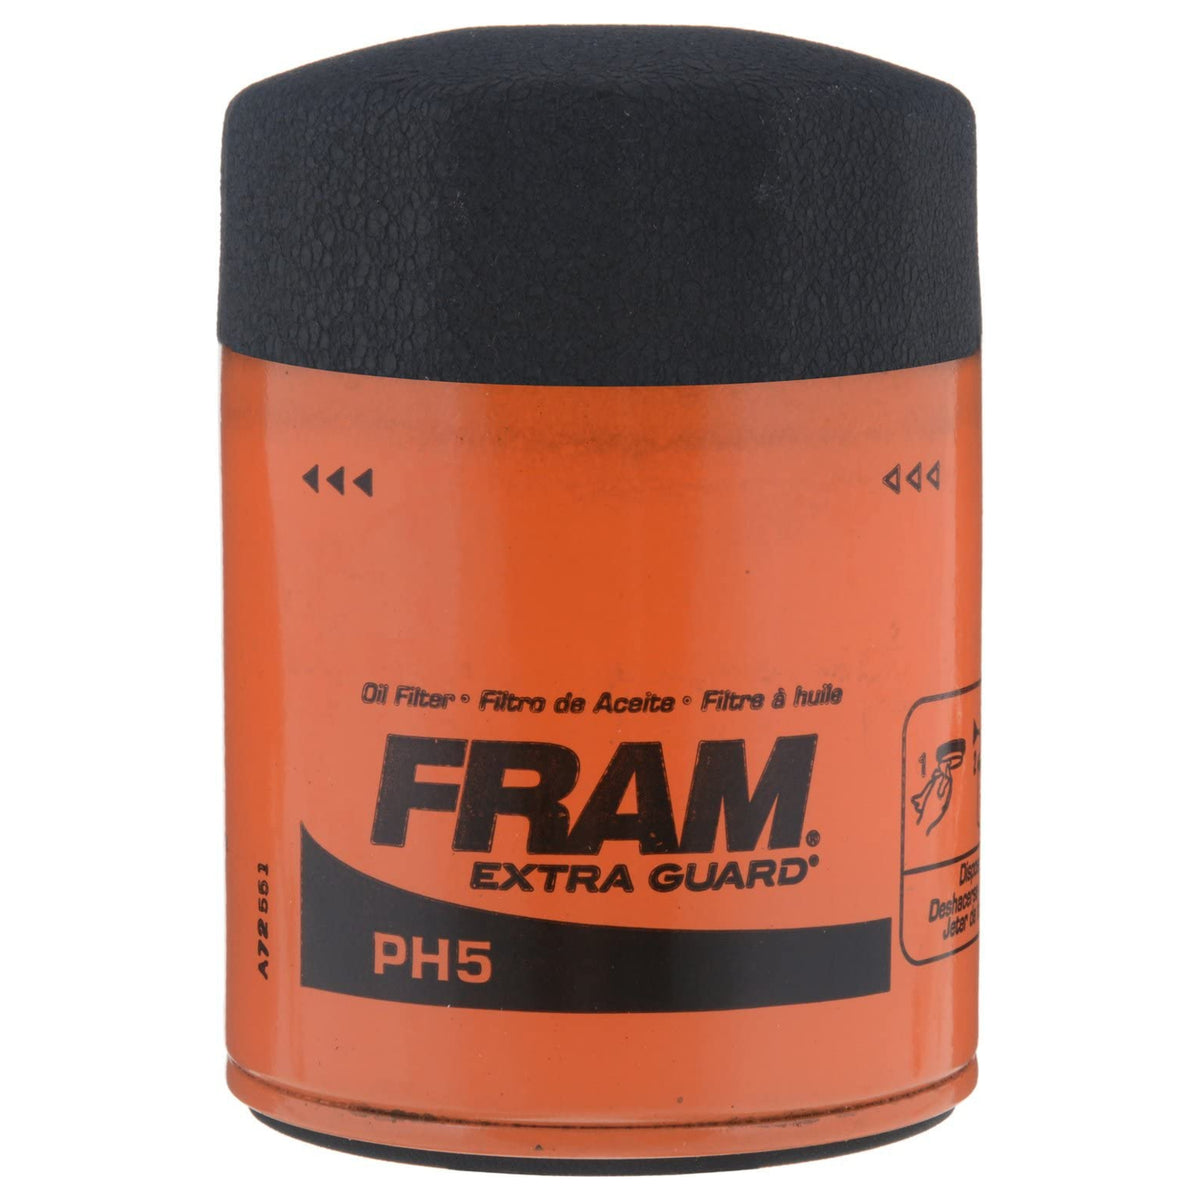 Fram PH5 Extra Guard Oil Filter, Up To 10000 Mile Protection